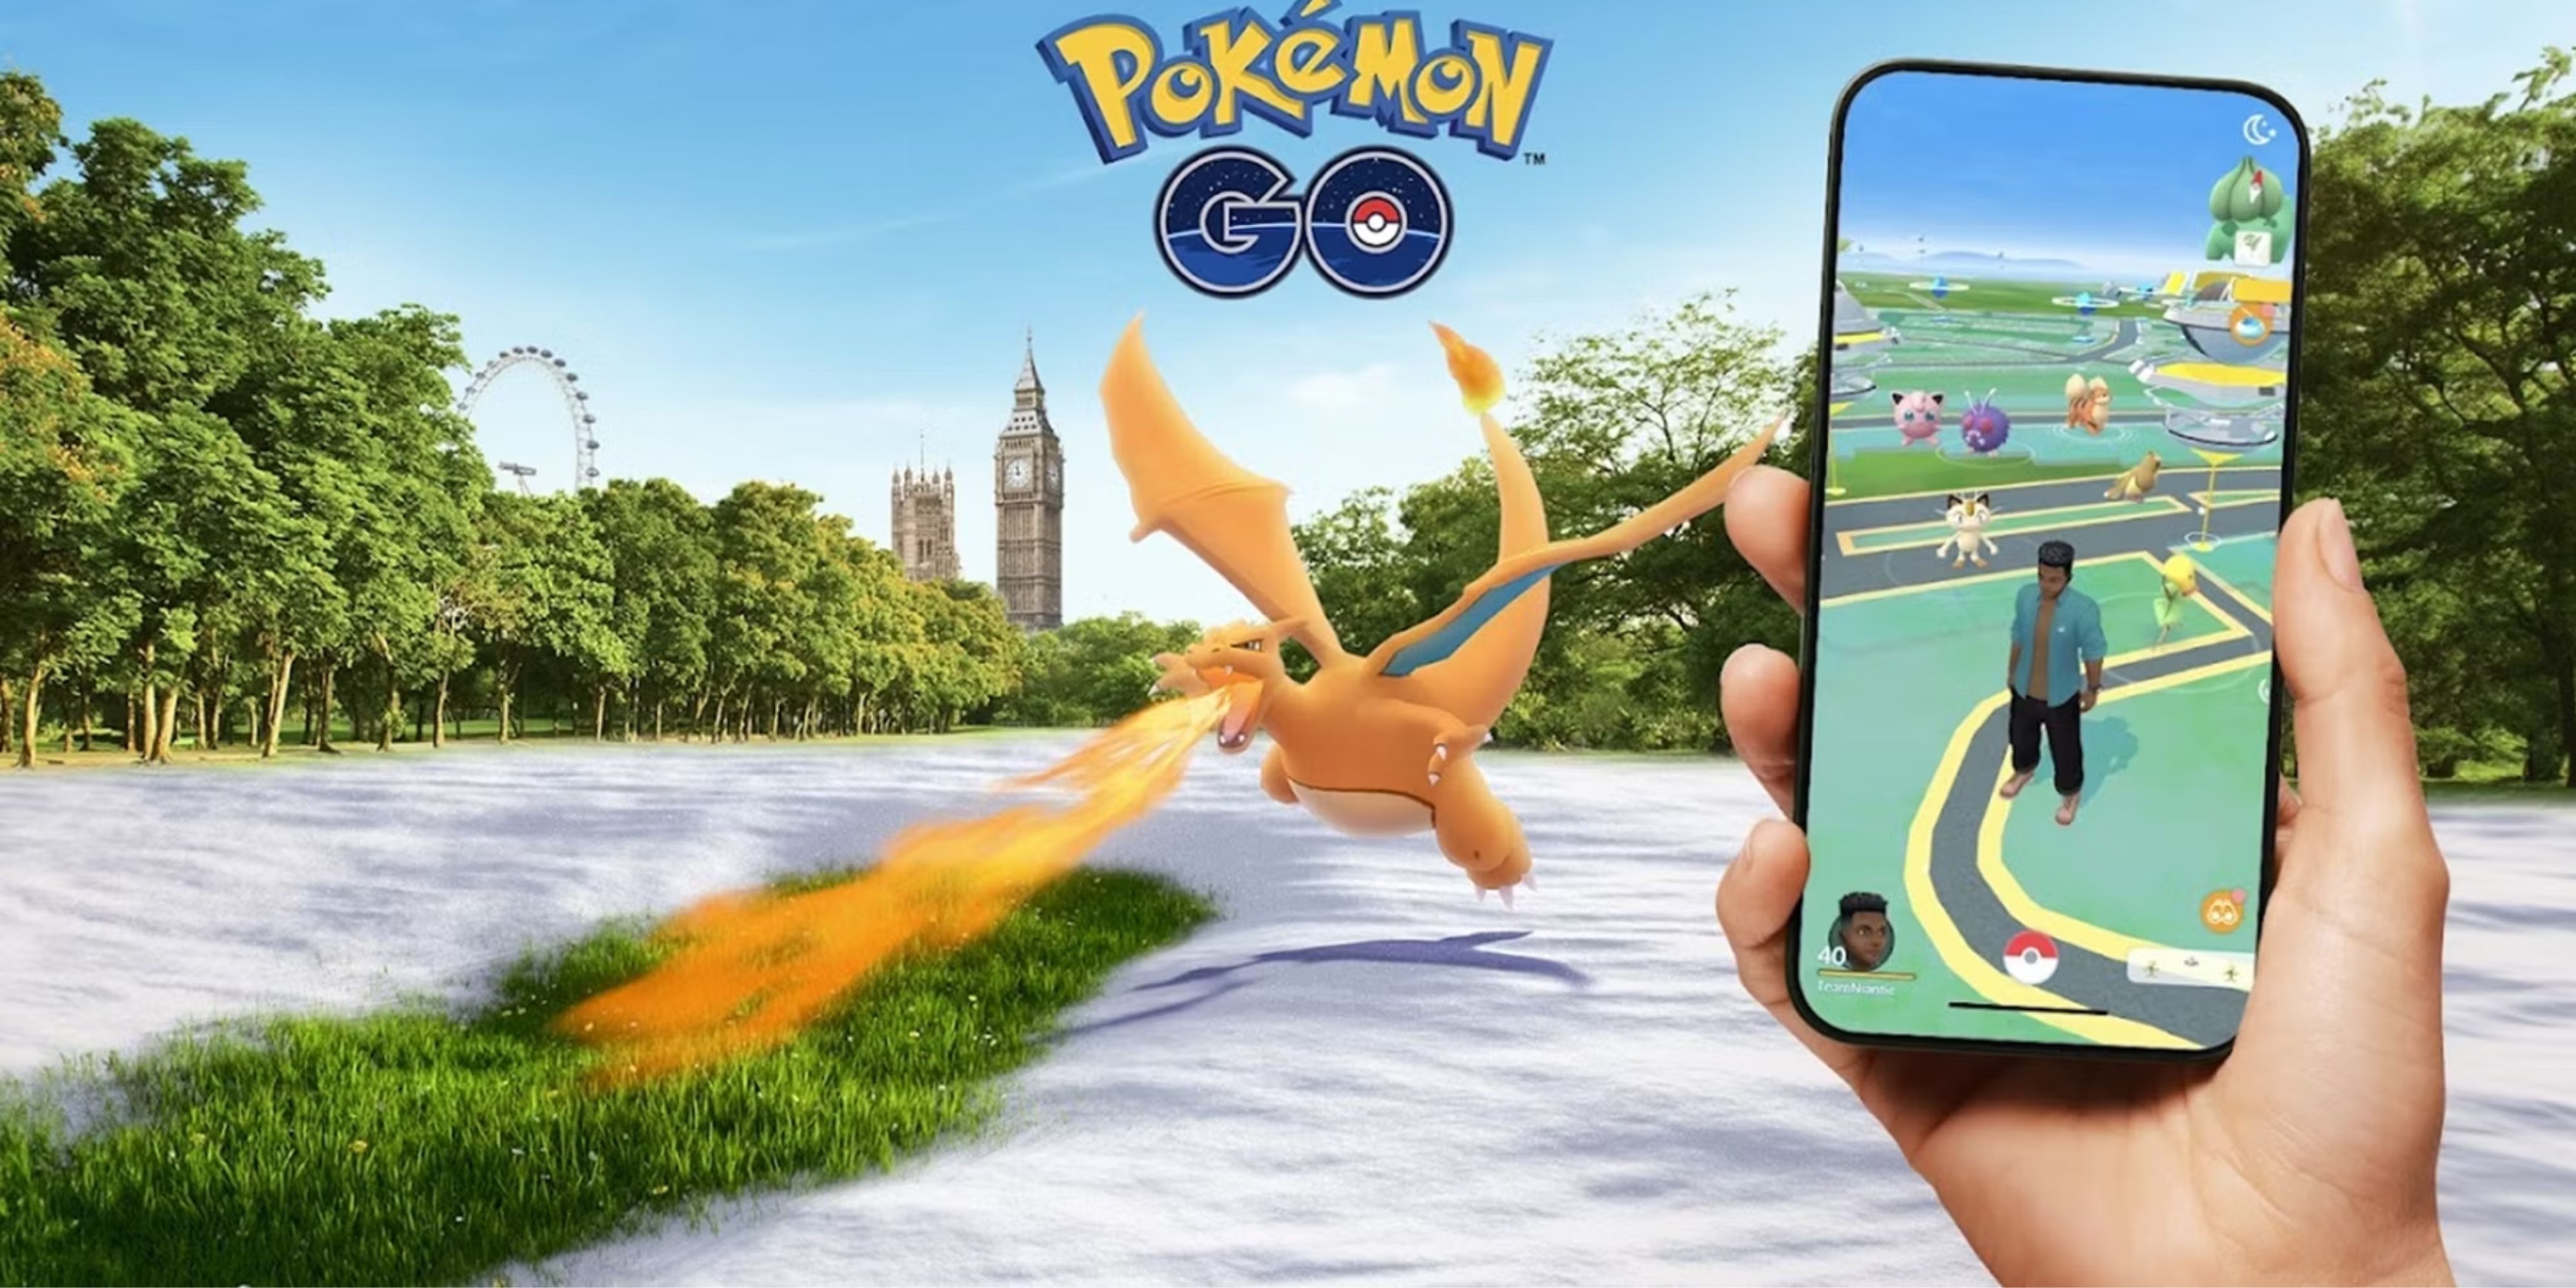 May 14 is Going to Be an Exciting Day for Pokemon GO Fans